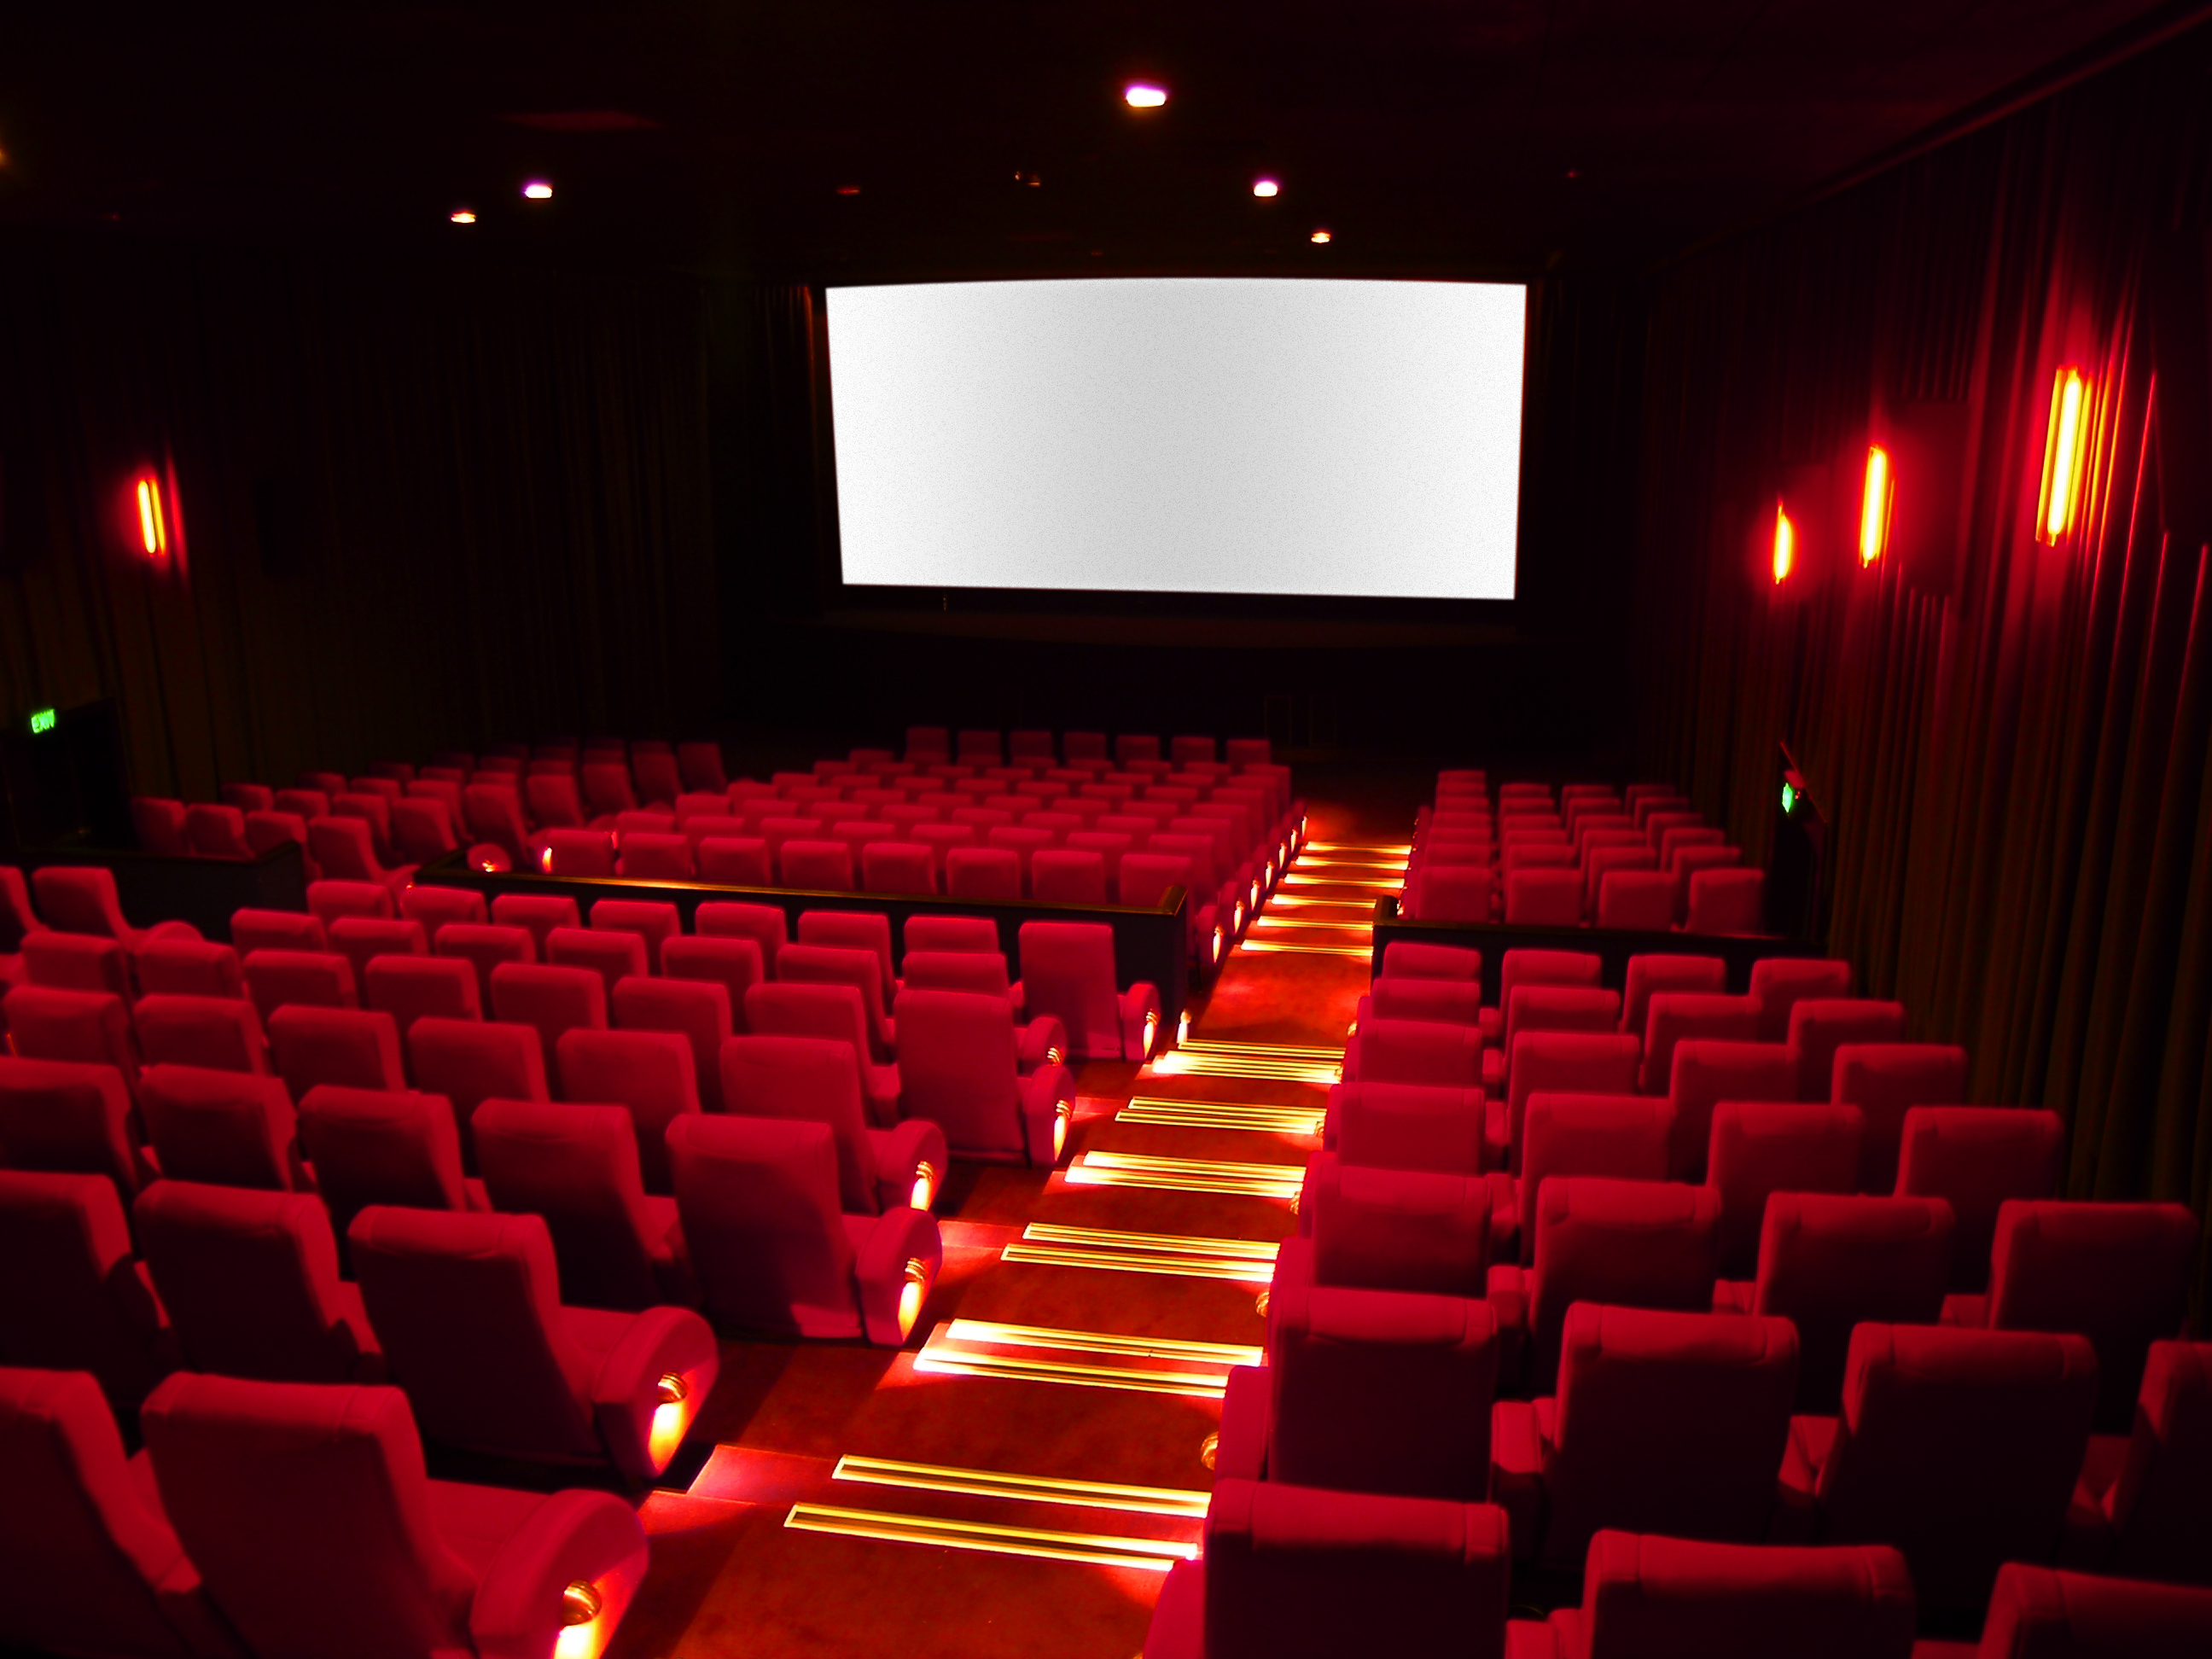 10 Things That Always Happen in the Cinema – We Bet #7 Drives You Nuts